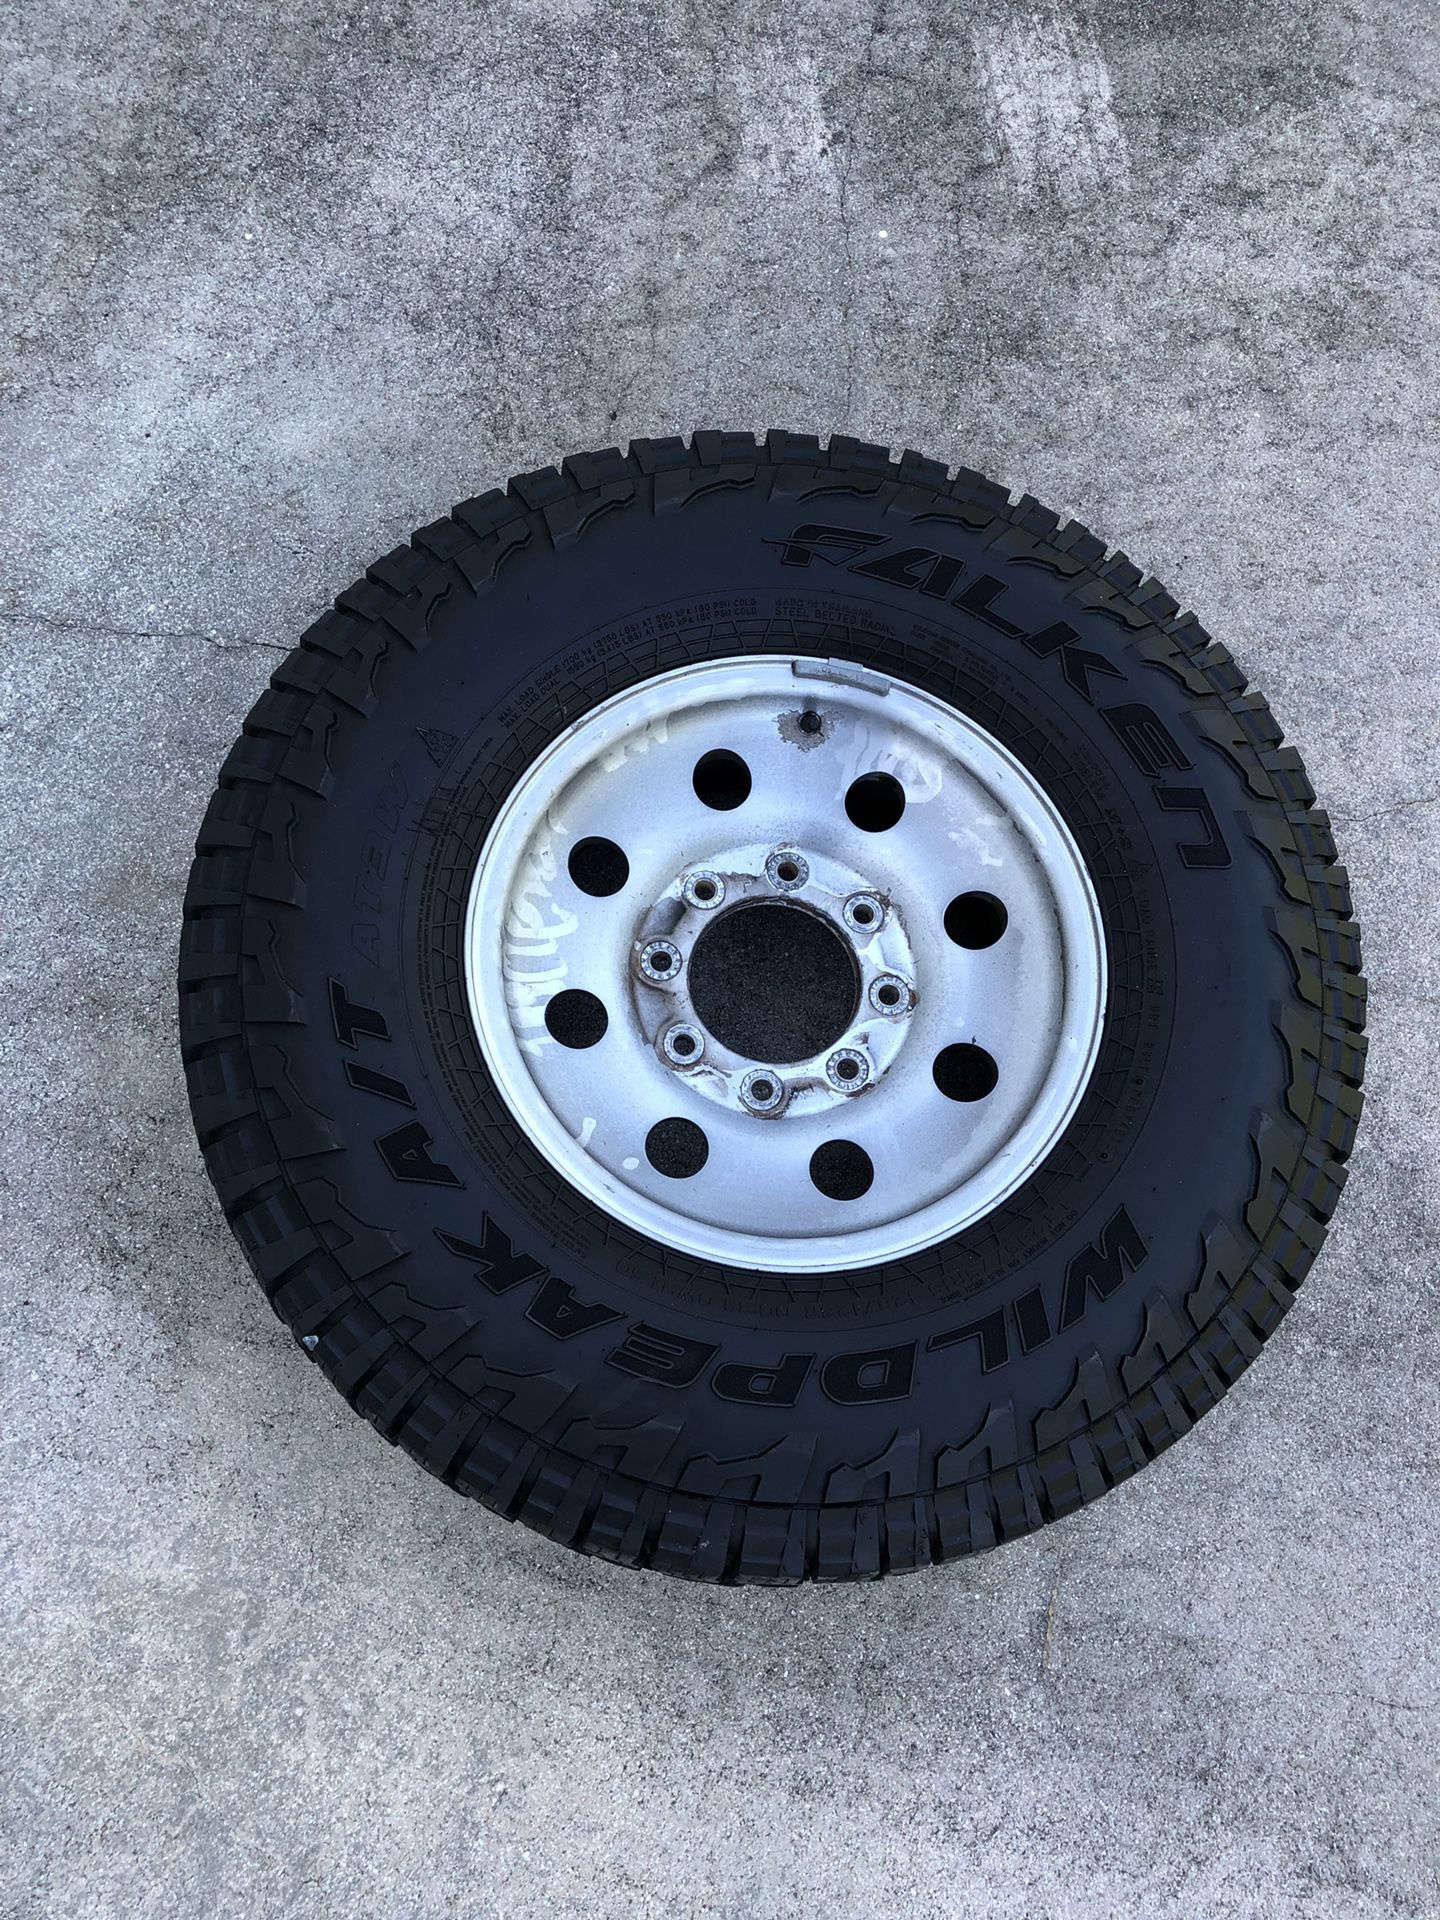 F-250 Stock Wheels and Tires